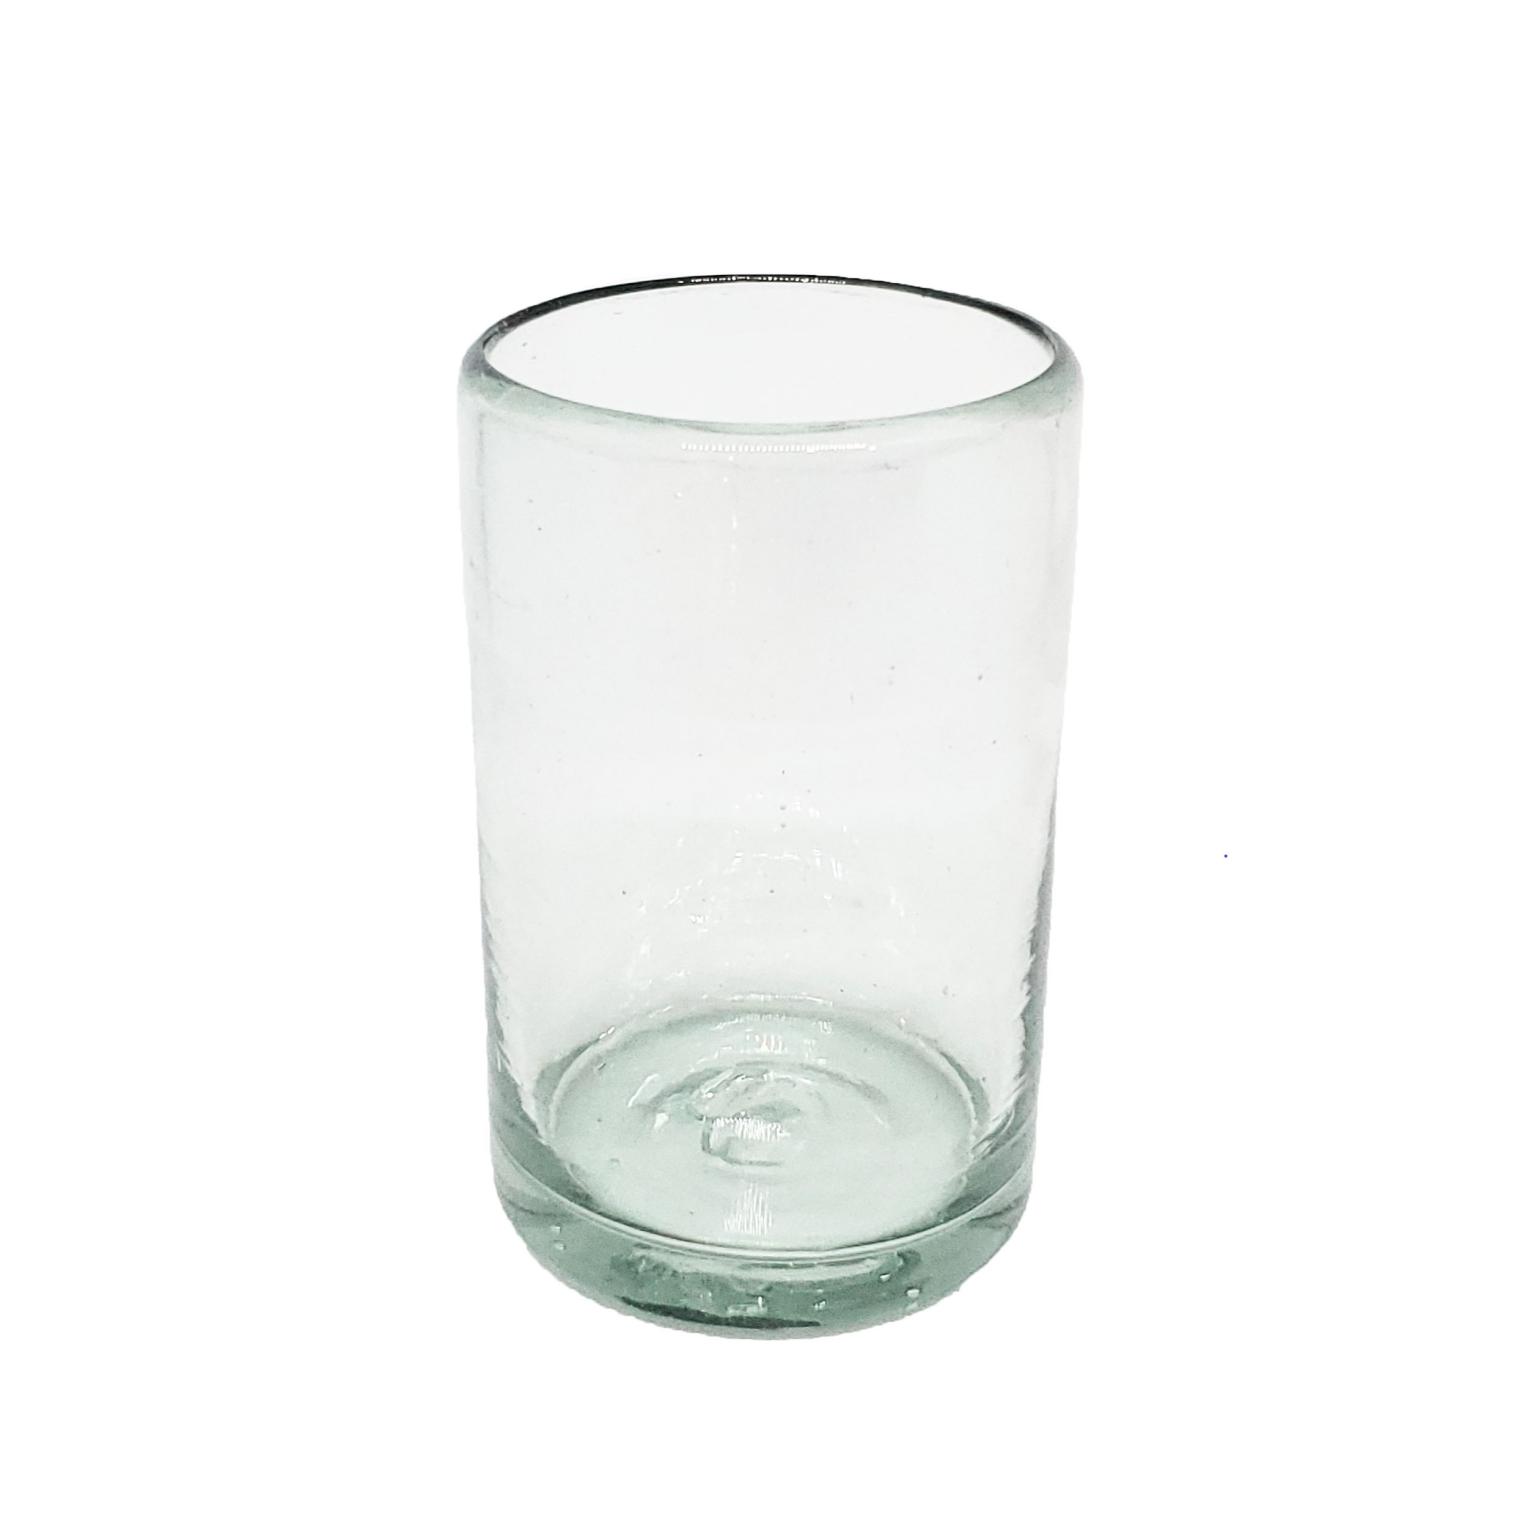 Wholesale Mexican Glasses / Clear 9 oz Juice Glasses  / These handcrafted glasses deliver a classic touch to your favorite drink.